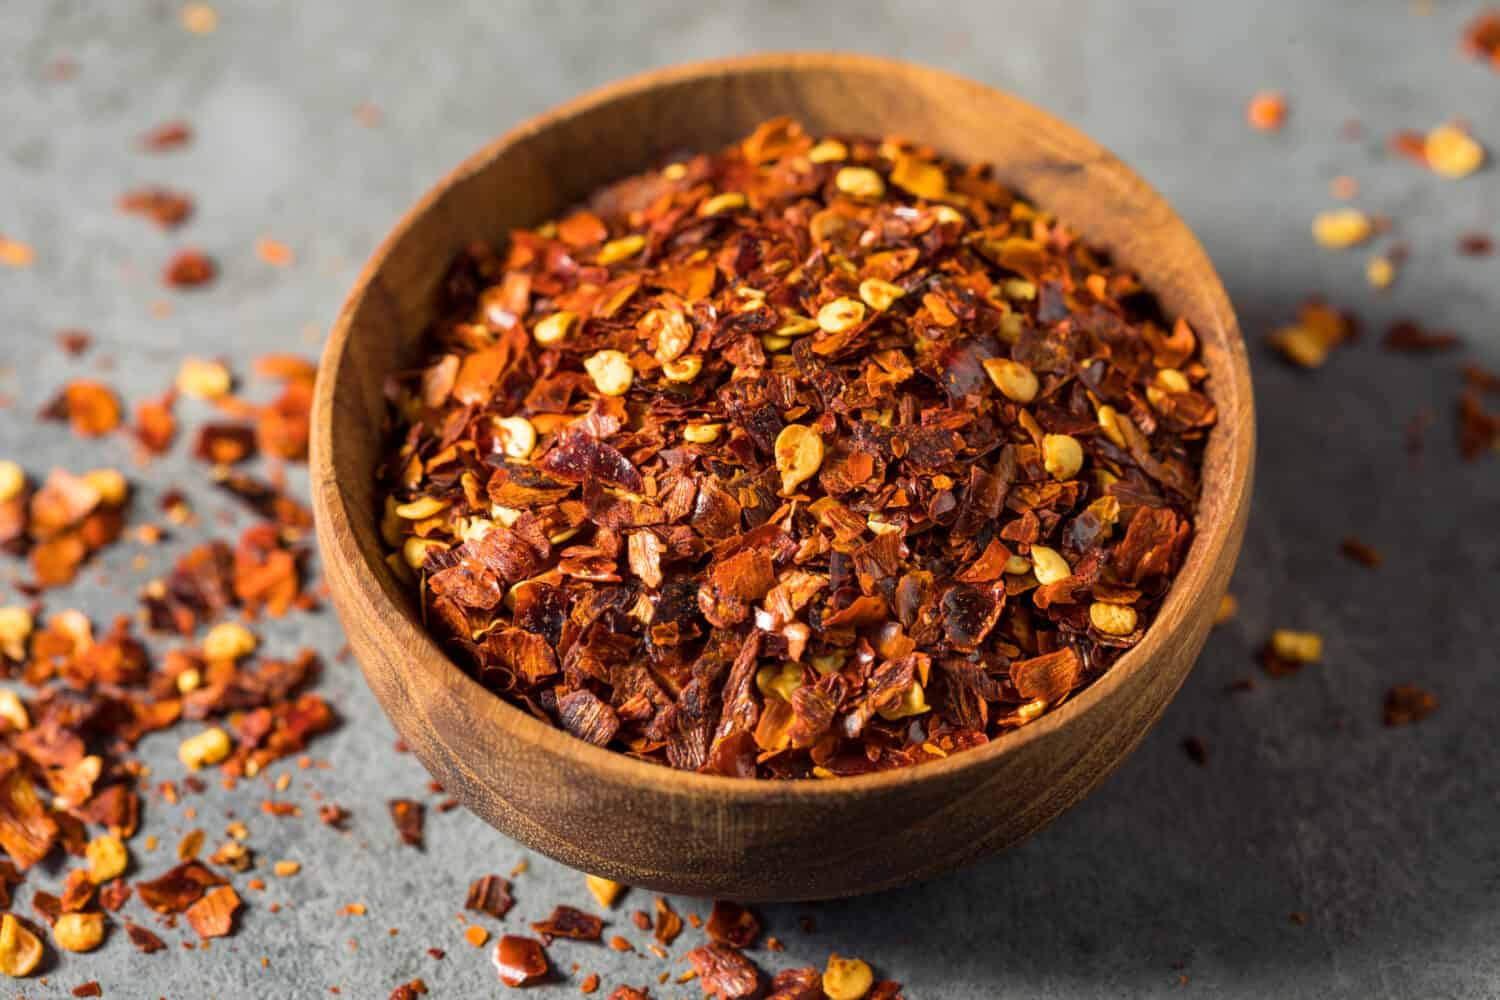 Wait, What Are Red Pepper Flakes Anyway?